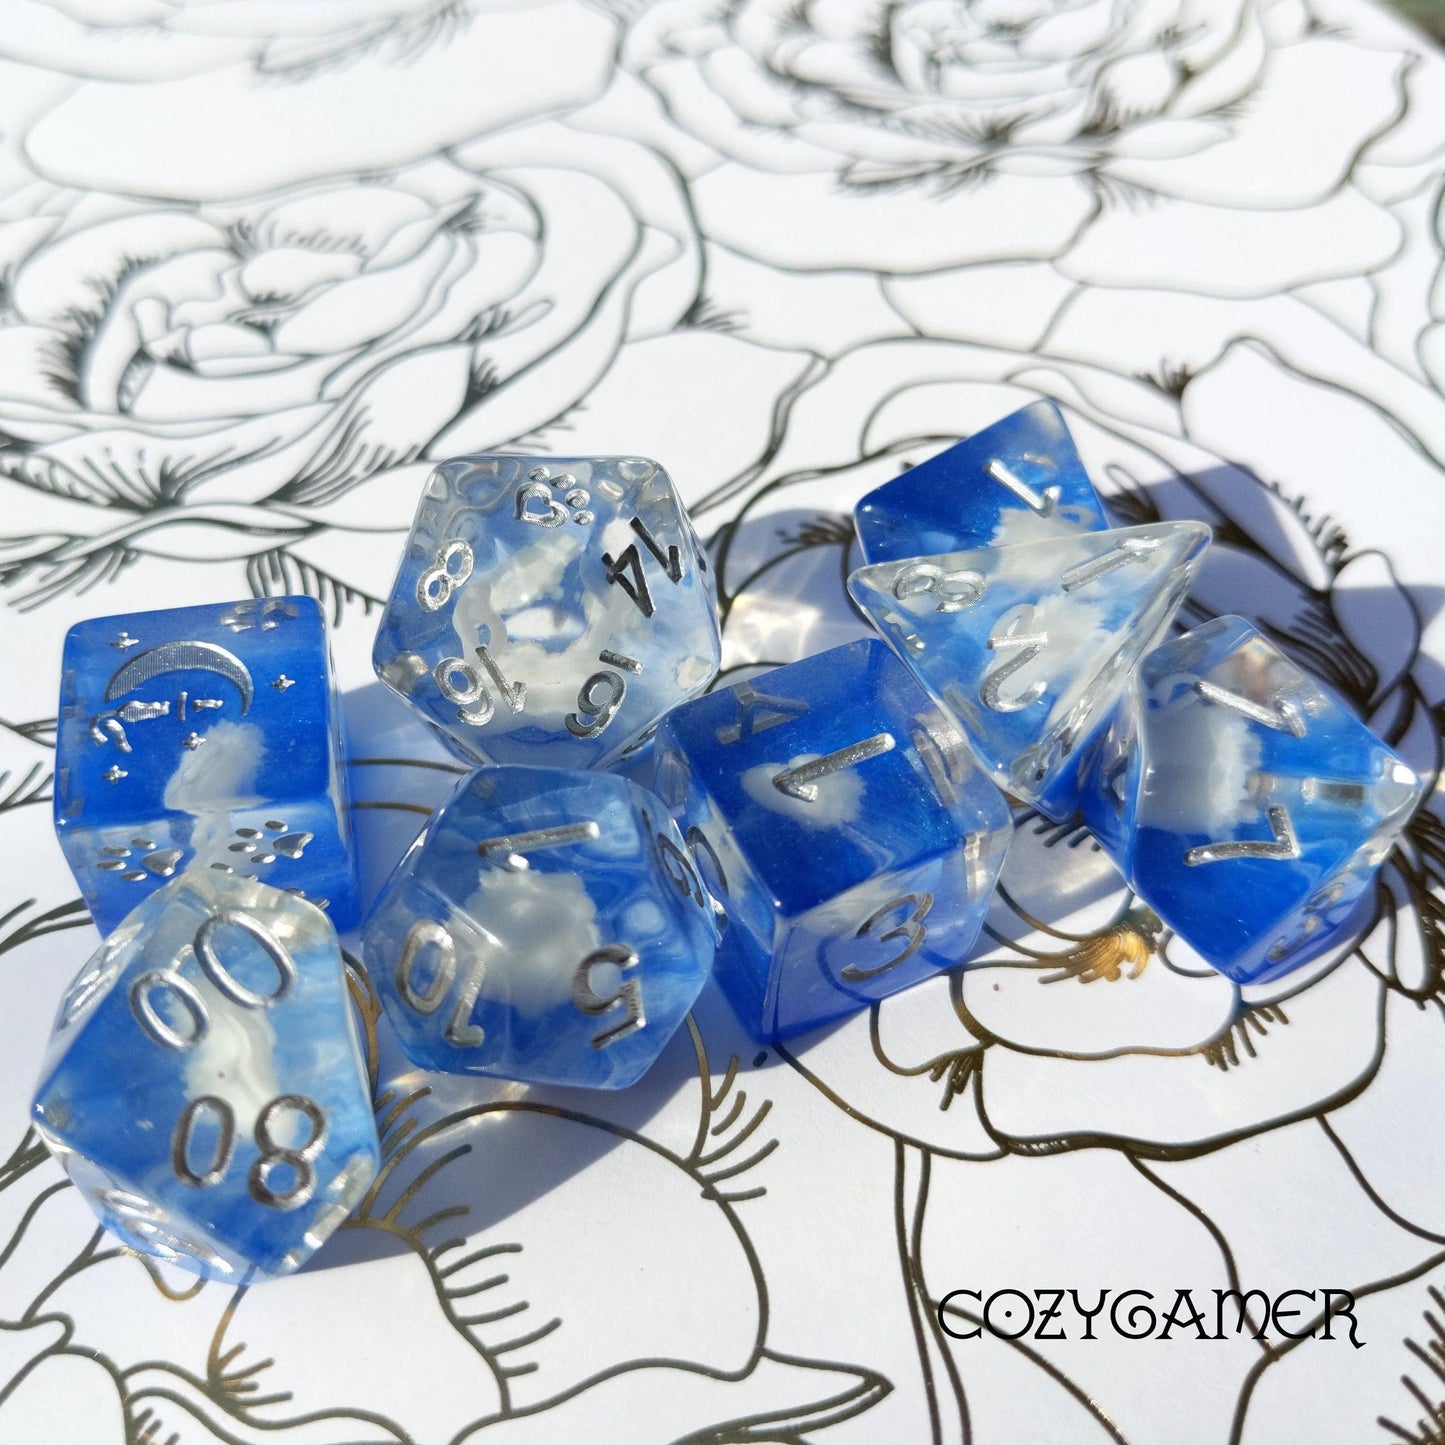 White Swan - 8 Dice Set - The Fourth Place